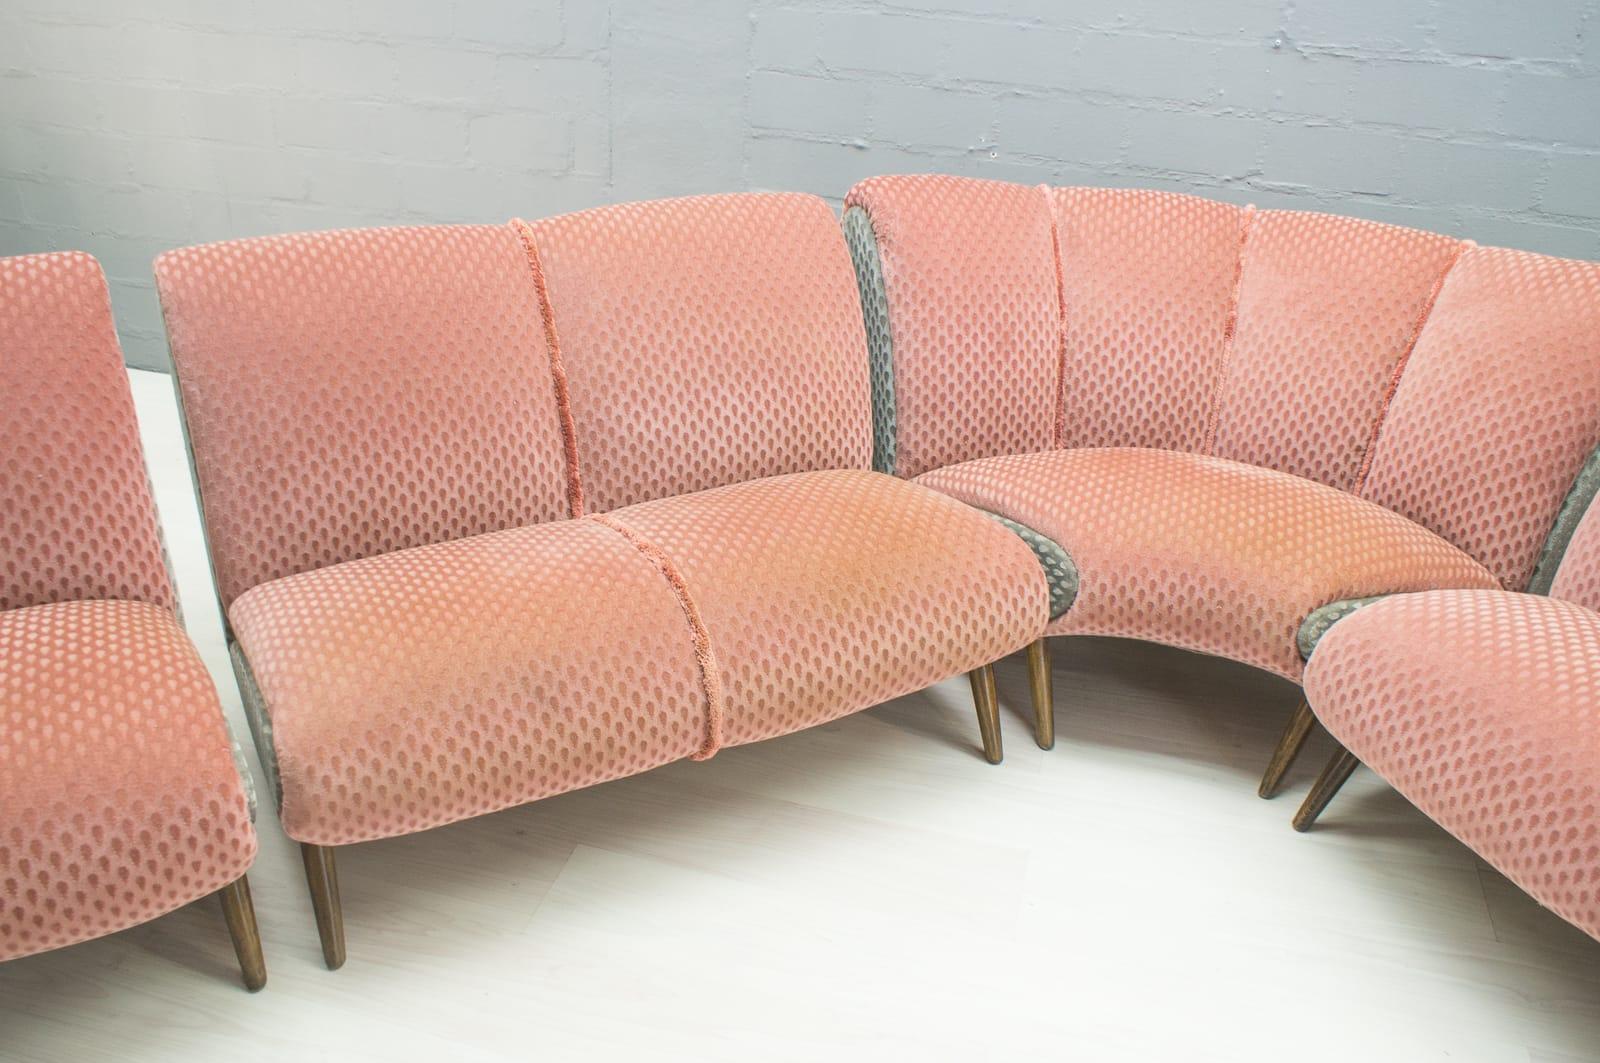 Extremely rare huge sofa set by Norman Bel Geddes from the 1950s, USA 9